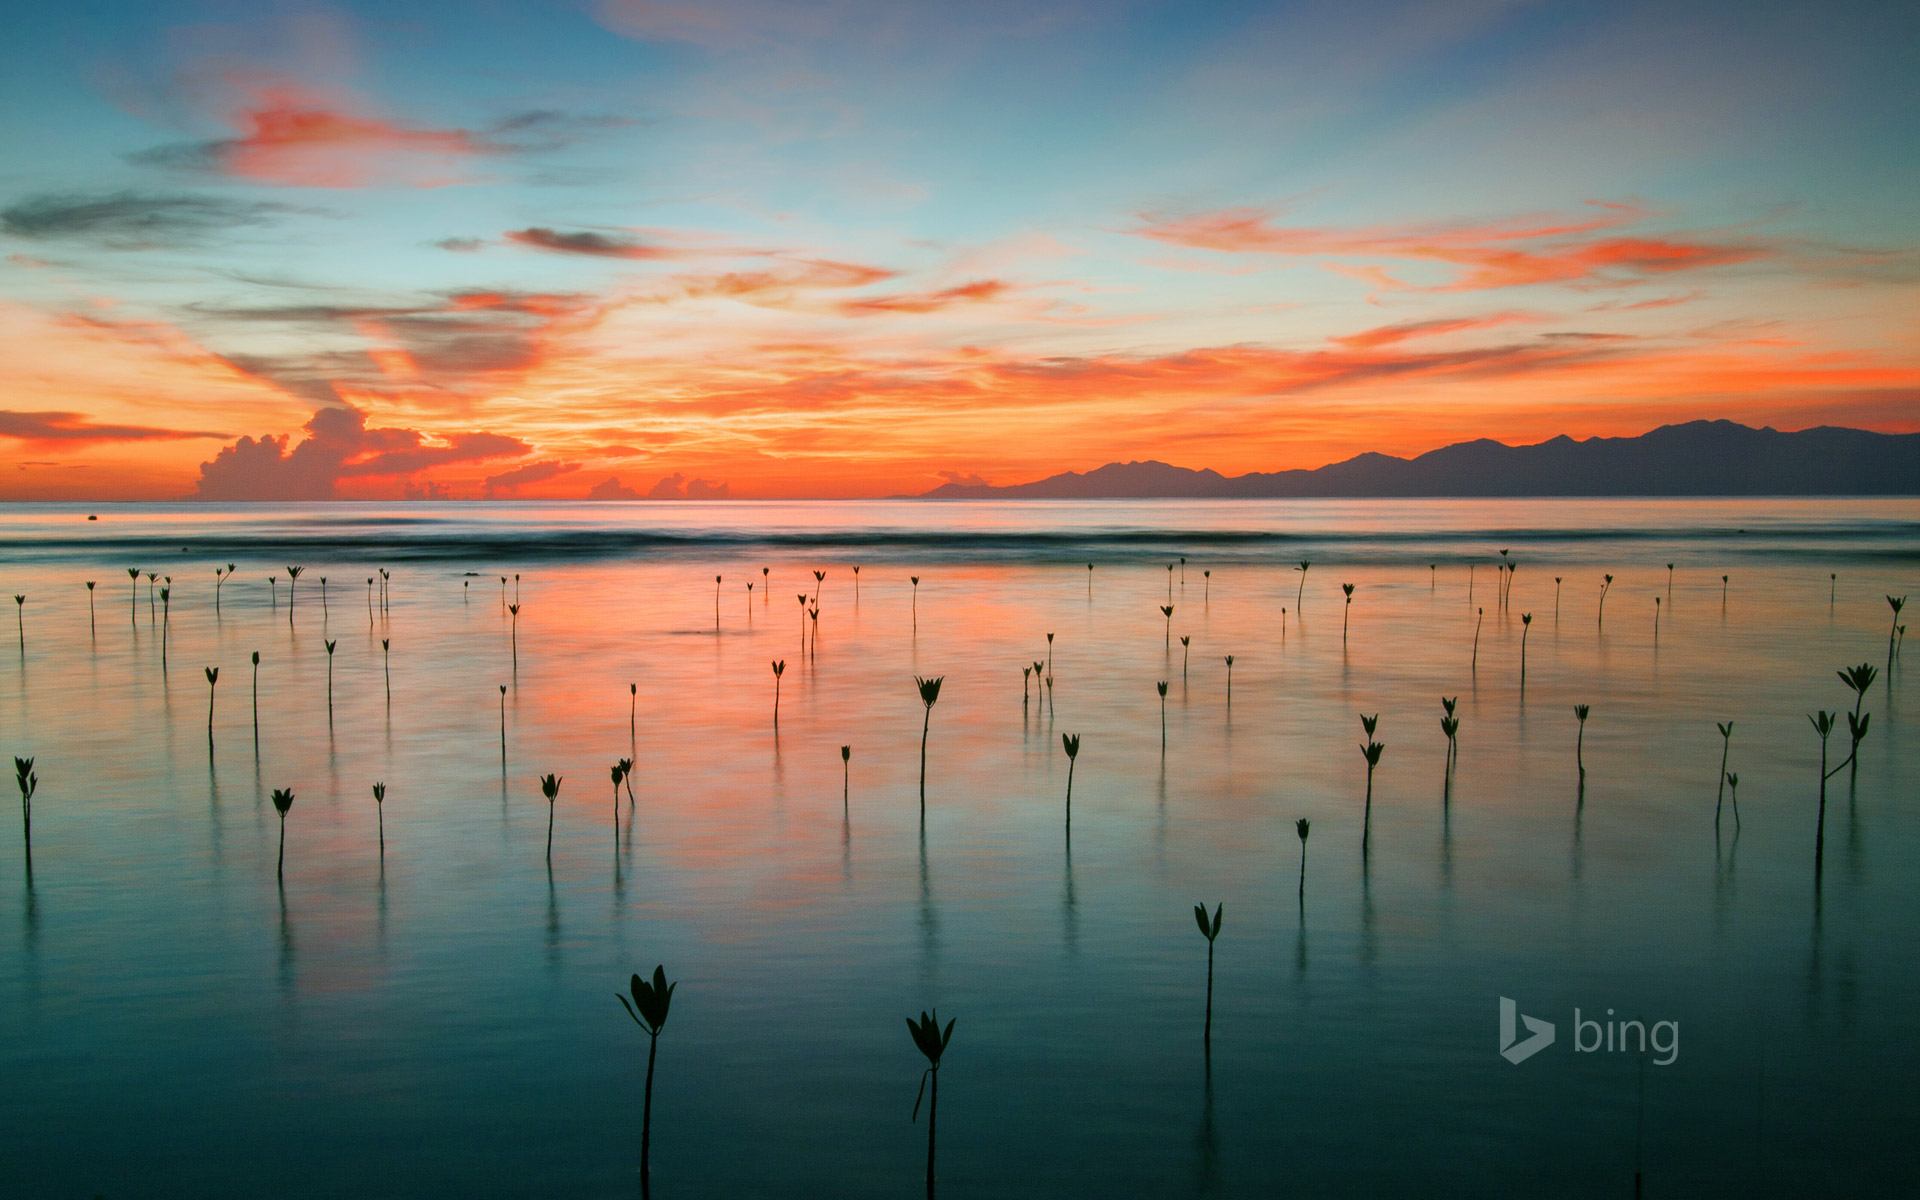 Bing's Homepage Gallery Offers The Most Beautiful Wallpapers Imaginable -  LifeHack